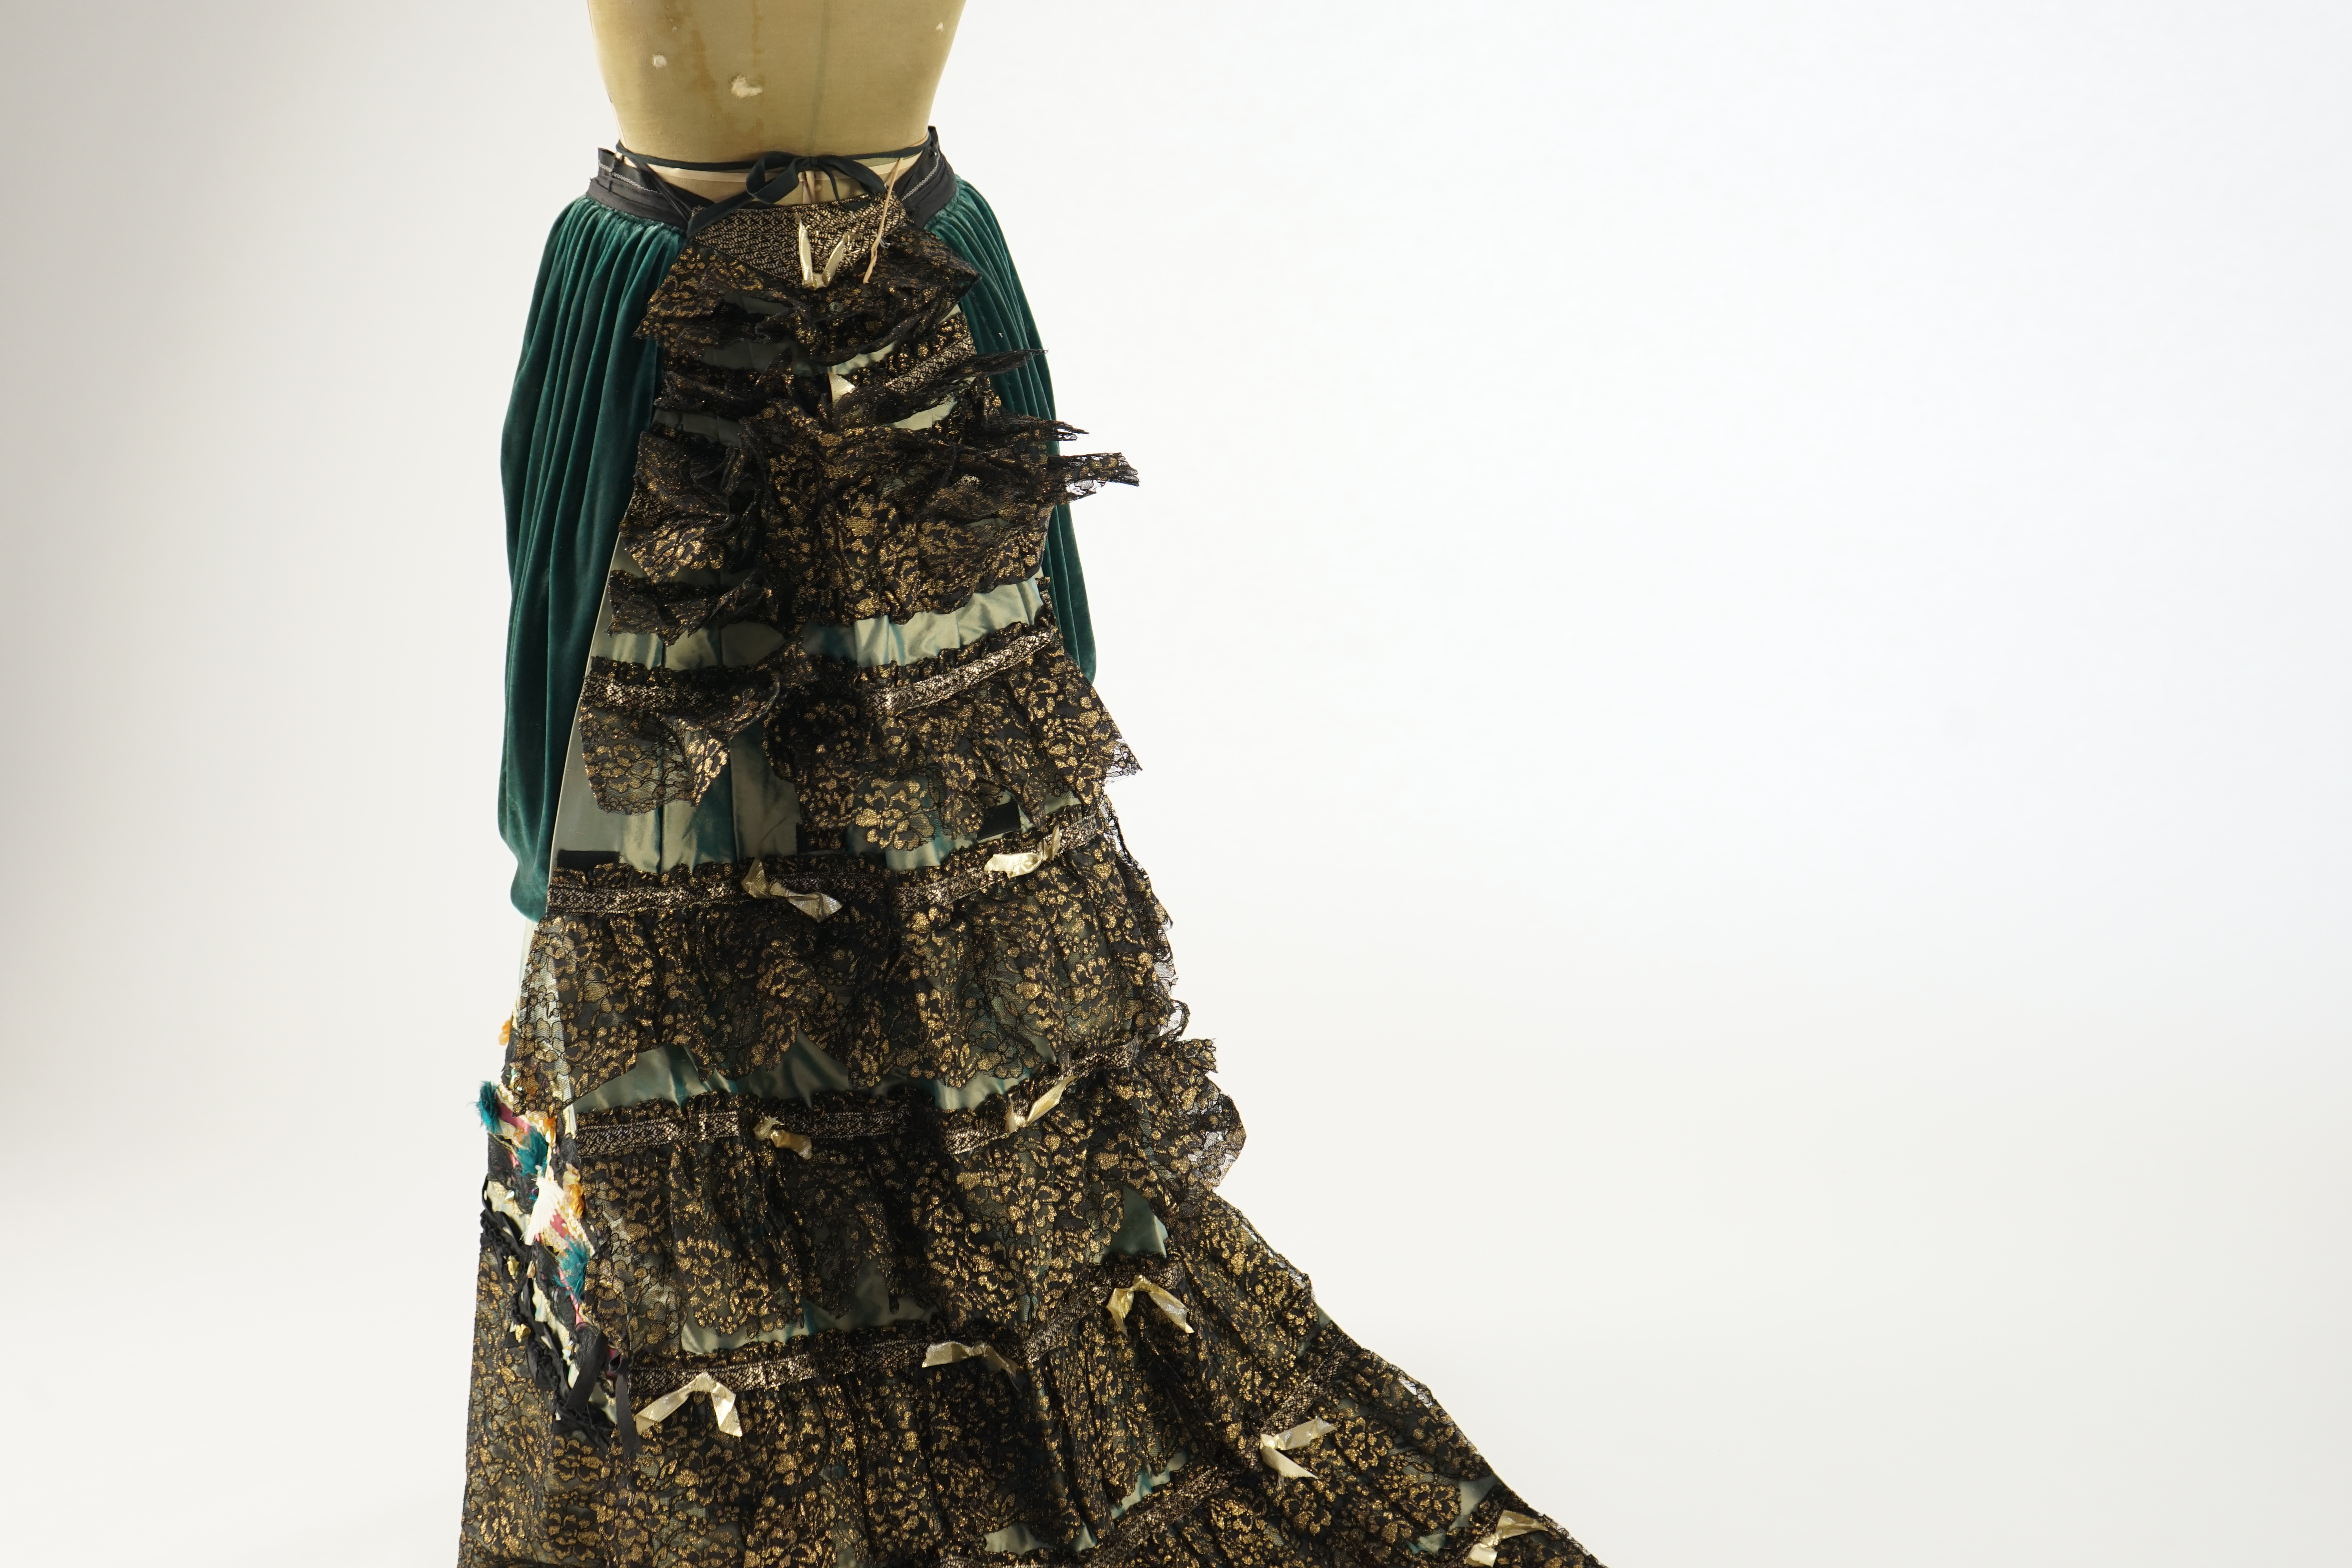 An Edwardian style lady's green taffeta skirt decorated with beaded, sequinned, ribboned border and swags of silk velvet, together with matching train layered with frilled black and gold lace, appliquéd with gold bows